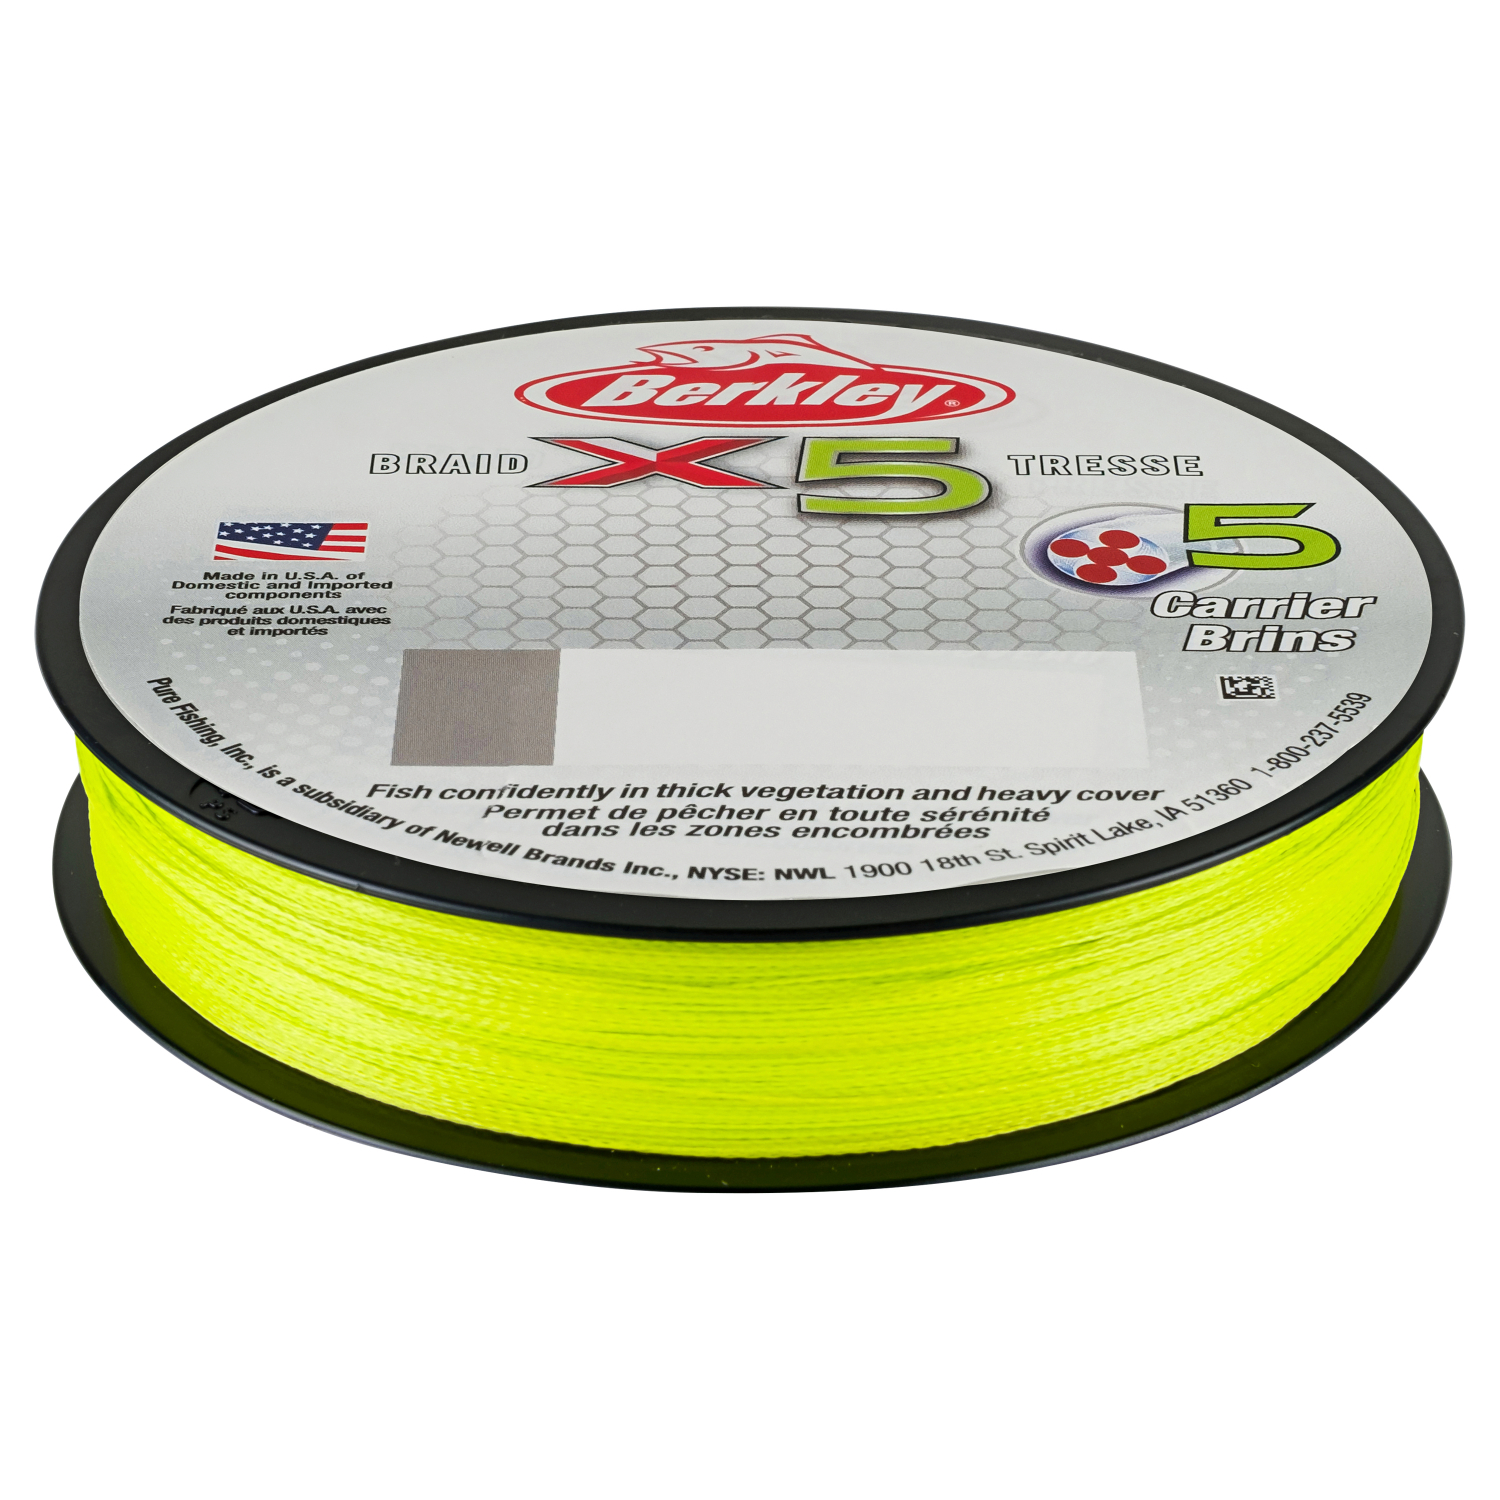 Berkley Fishing Line X5 Braid (Flame Green, 150 m) at low prices